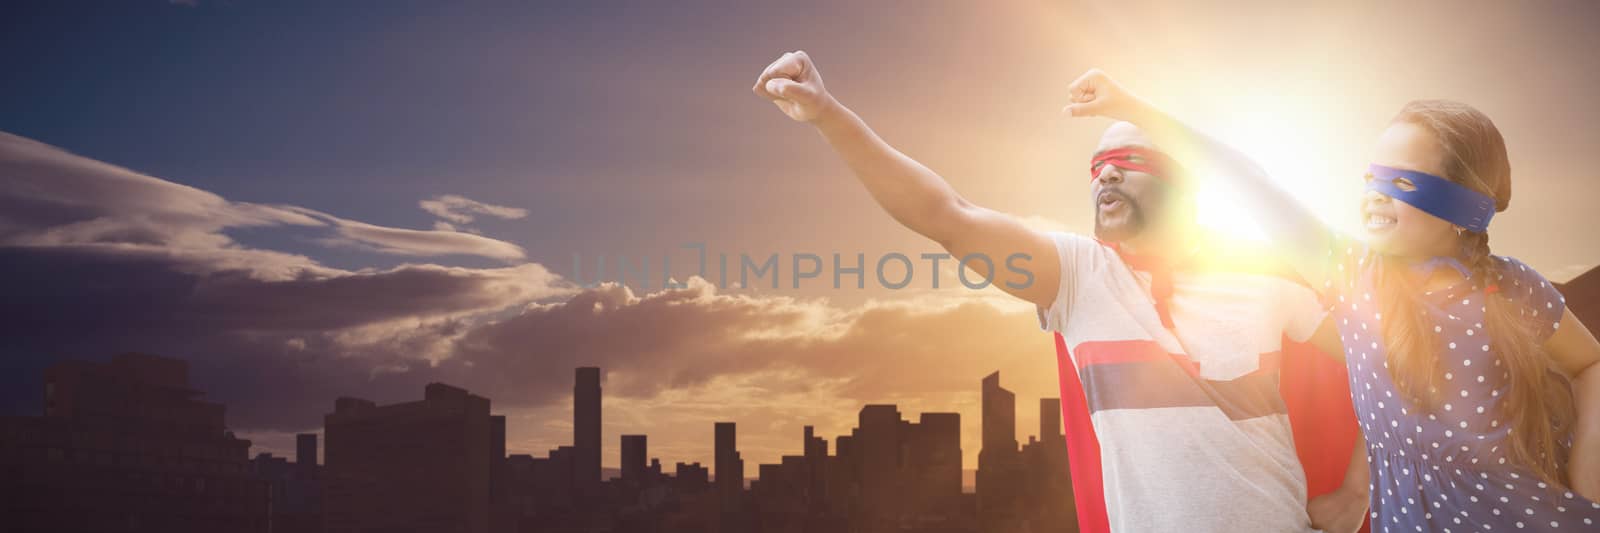 Composite image of father and daughter pretending to be superhero by Wavebreakmedia